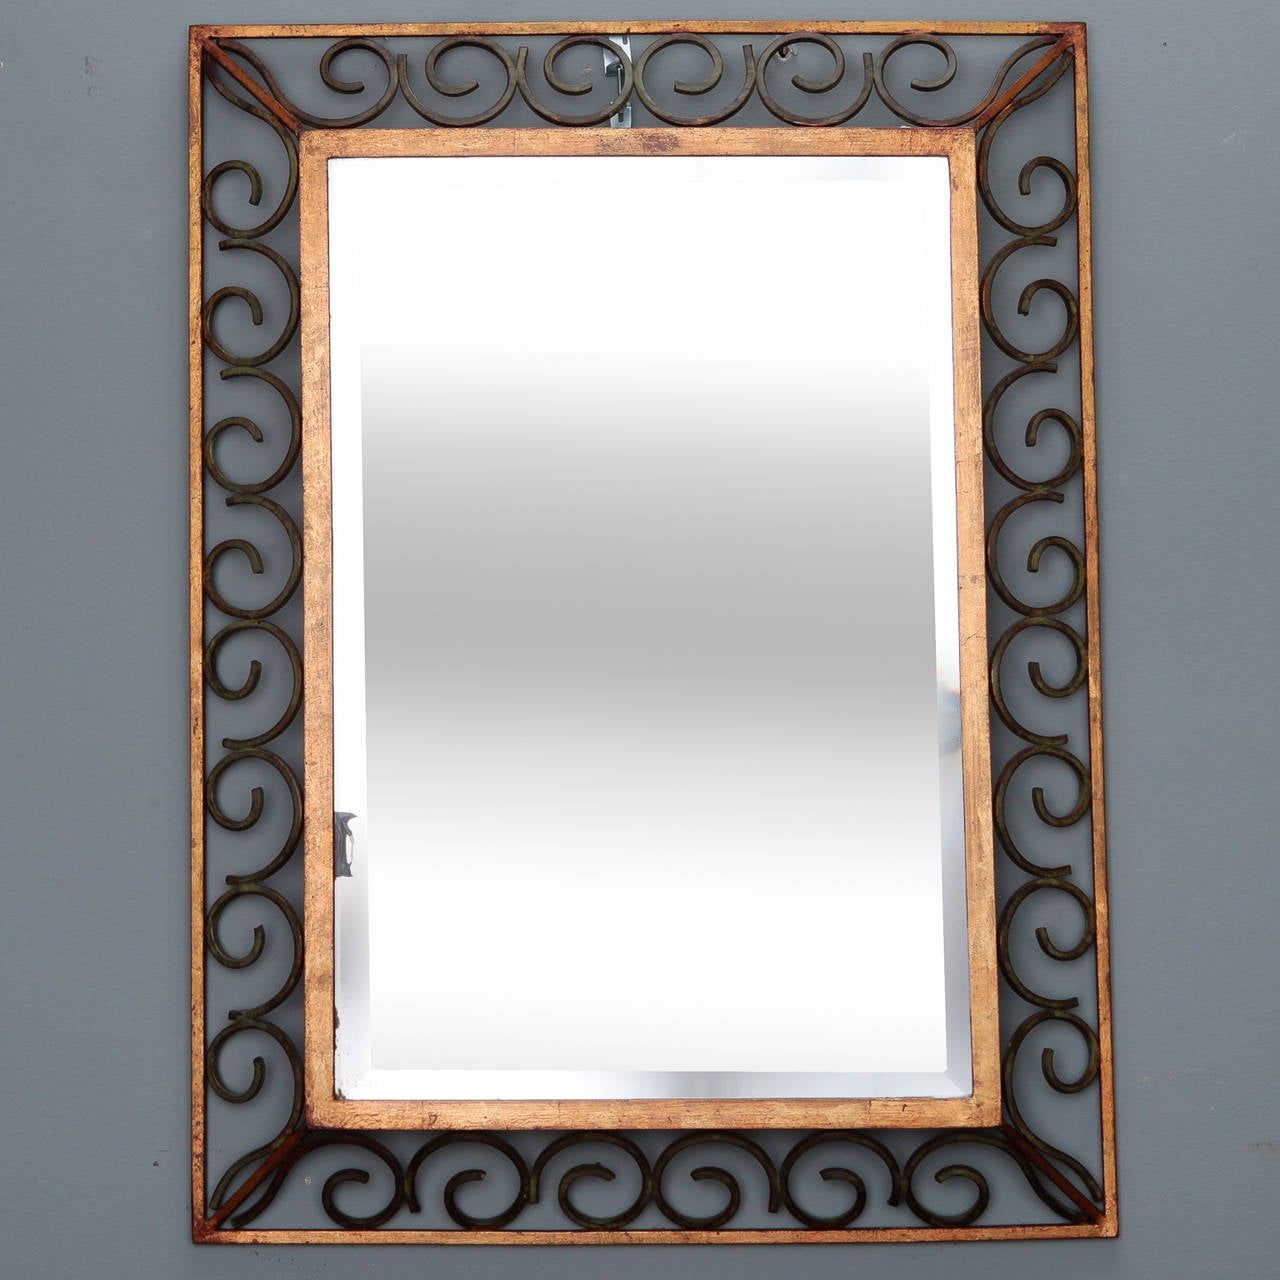 Art Deco Gilt Iron Framed Rectangular Mirror For Sale At 1stdibs With Regard To Natural Iron Rectangular Wall Mirrors (View 8 of 15)